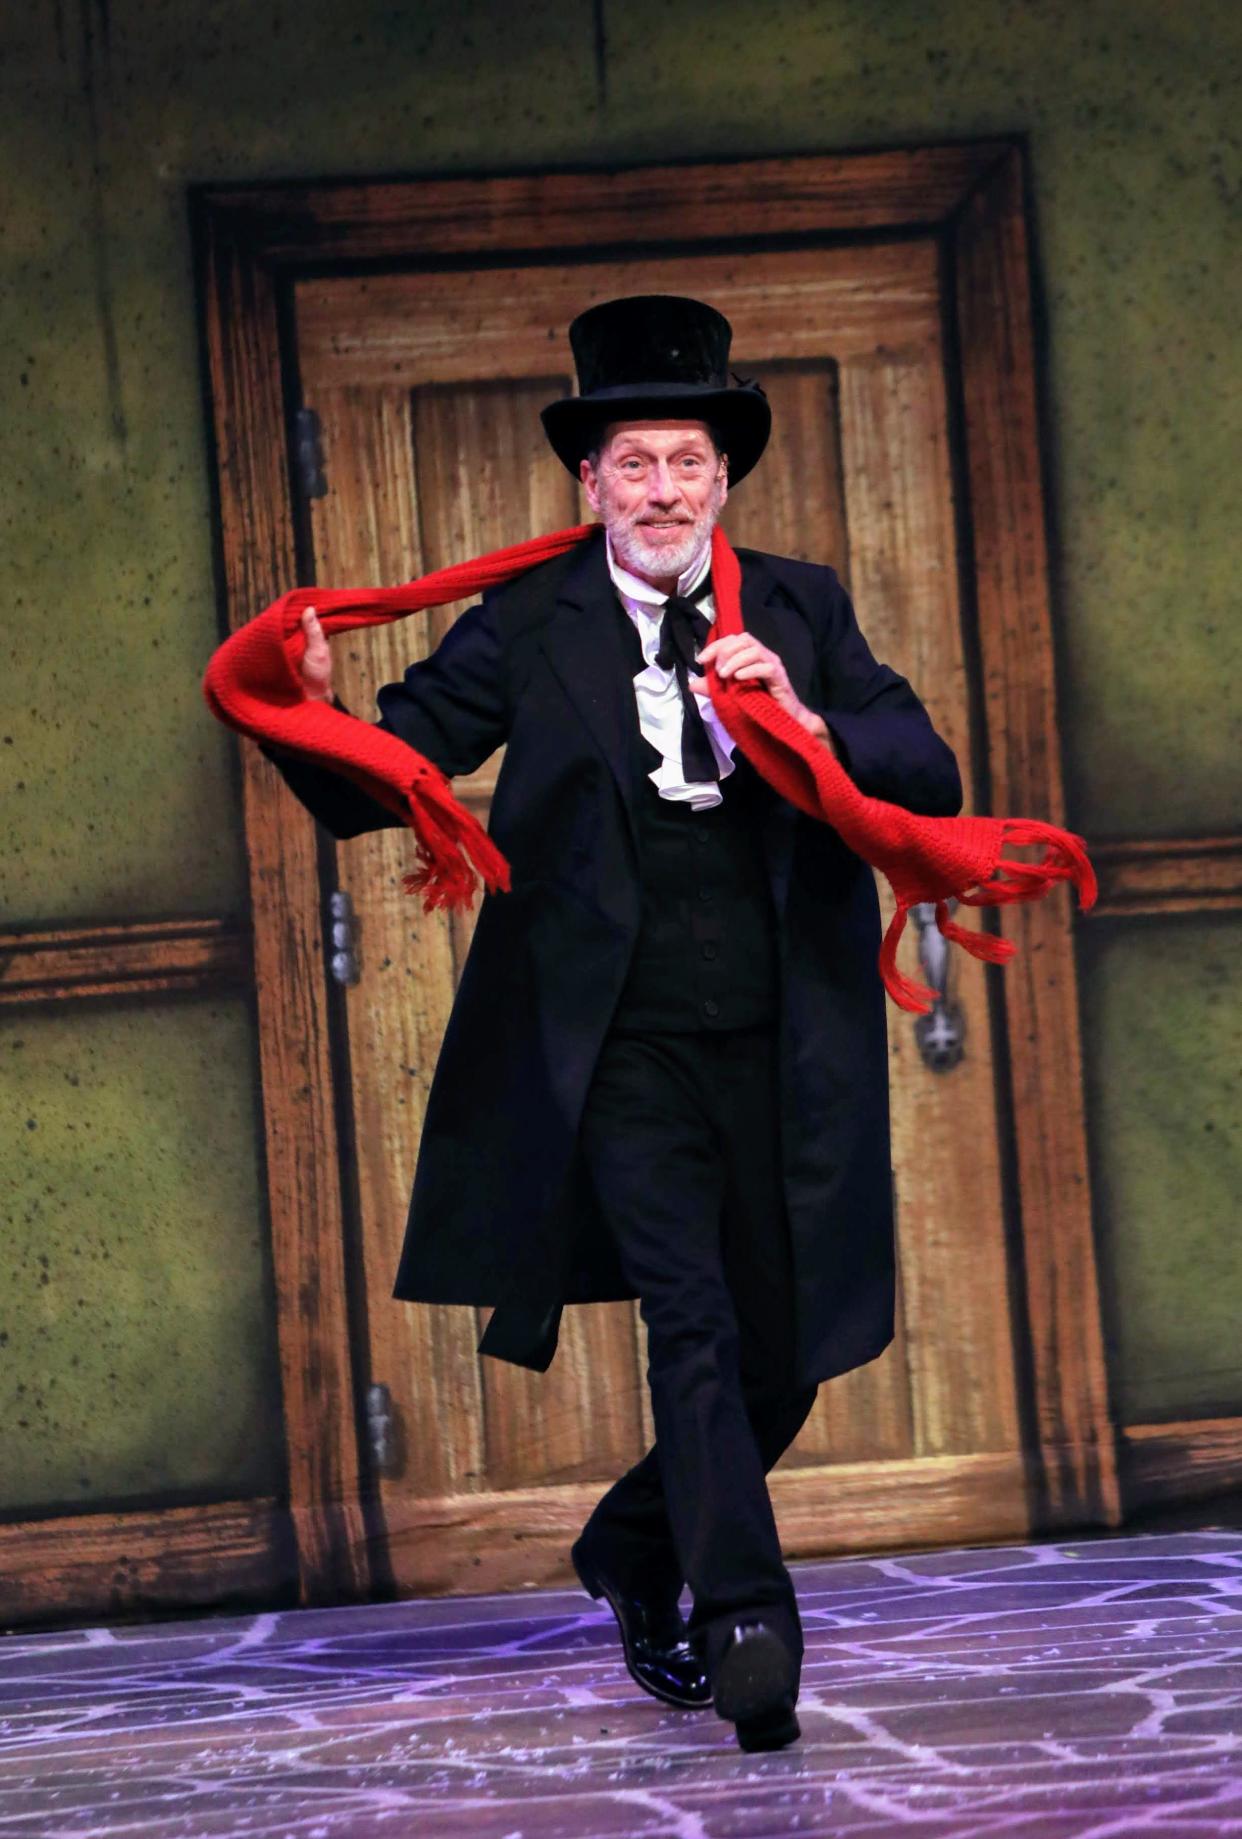 Brad Wages as Ebenezer Scrooge in the Venice Theatre production of “A Christmas Carol.”